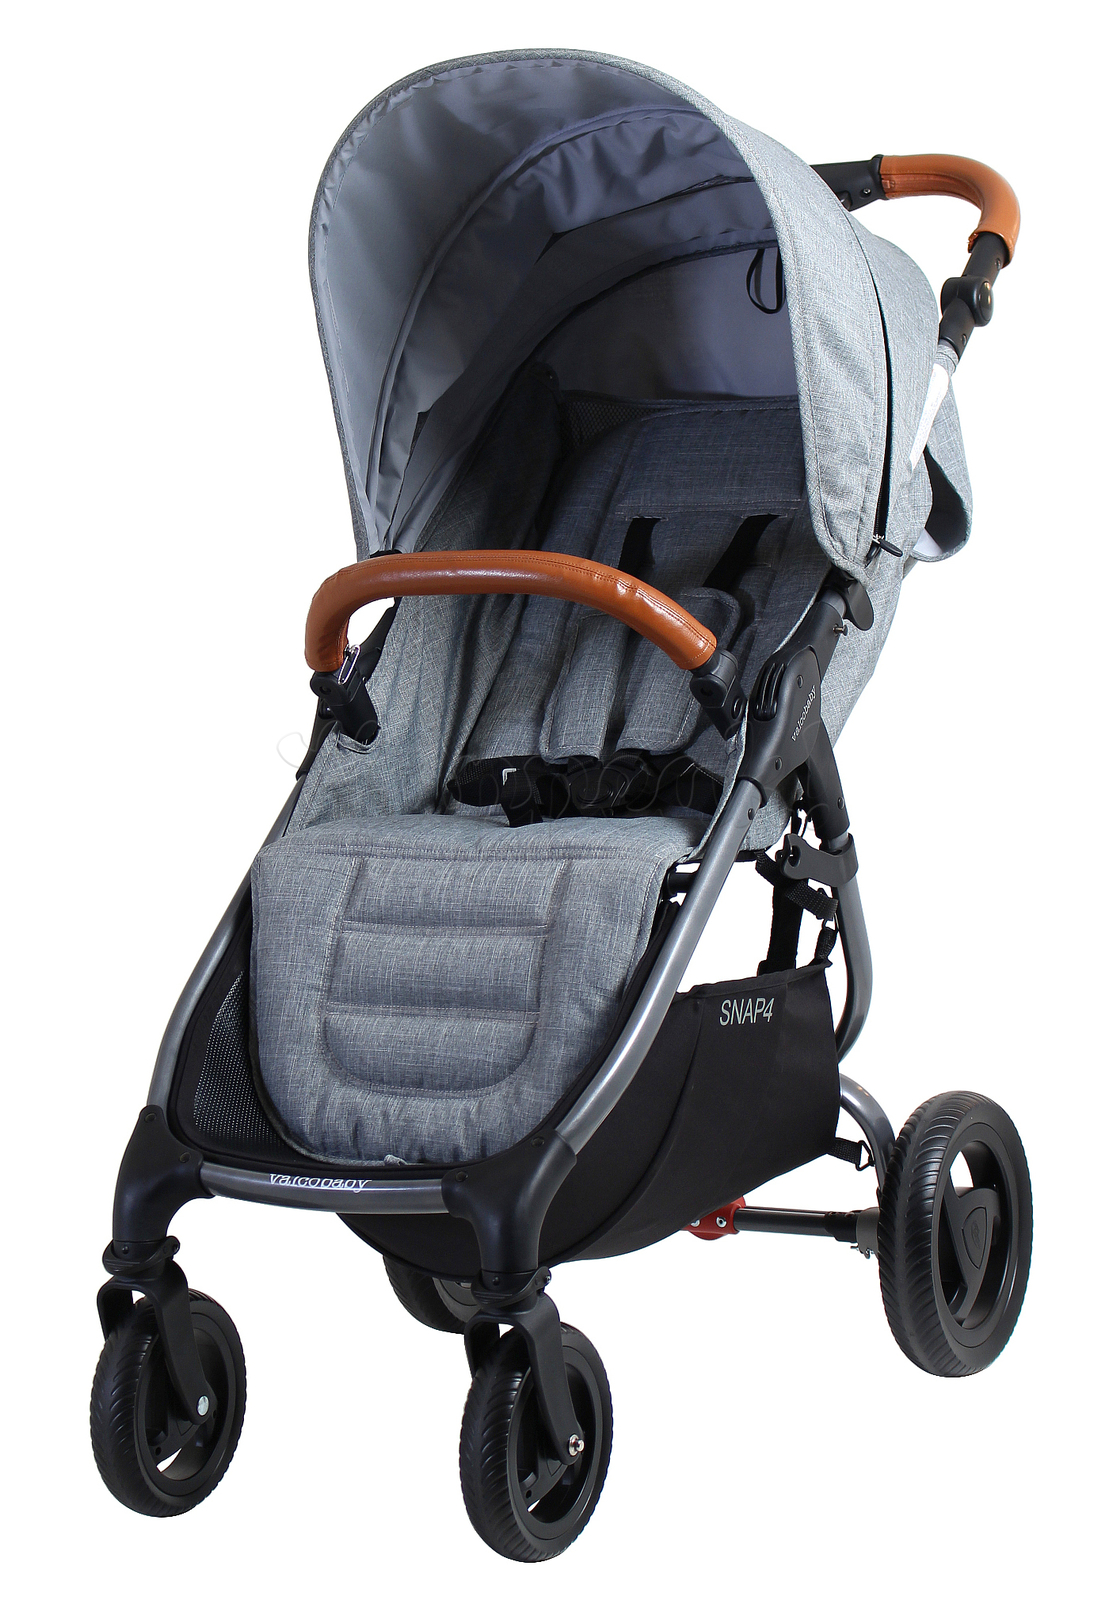 Коляска прогулочная VALCO BABY SNAP 4 TREND TAILORMADE GREY MARLE